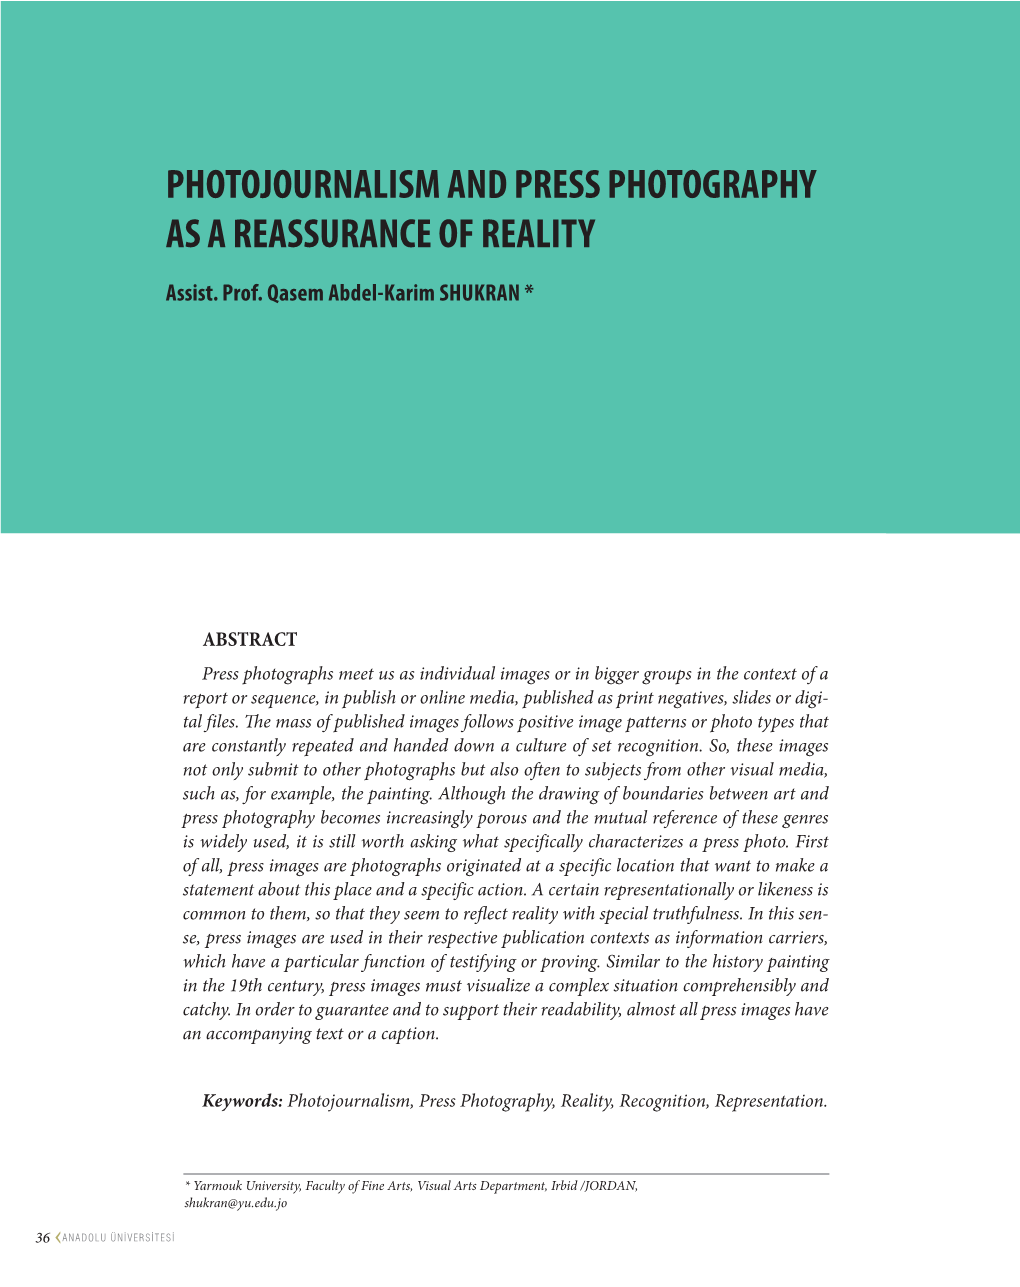 Photojournalism and Press Photography As a Reassurance of Reality